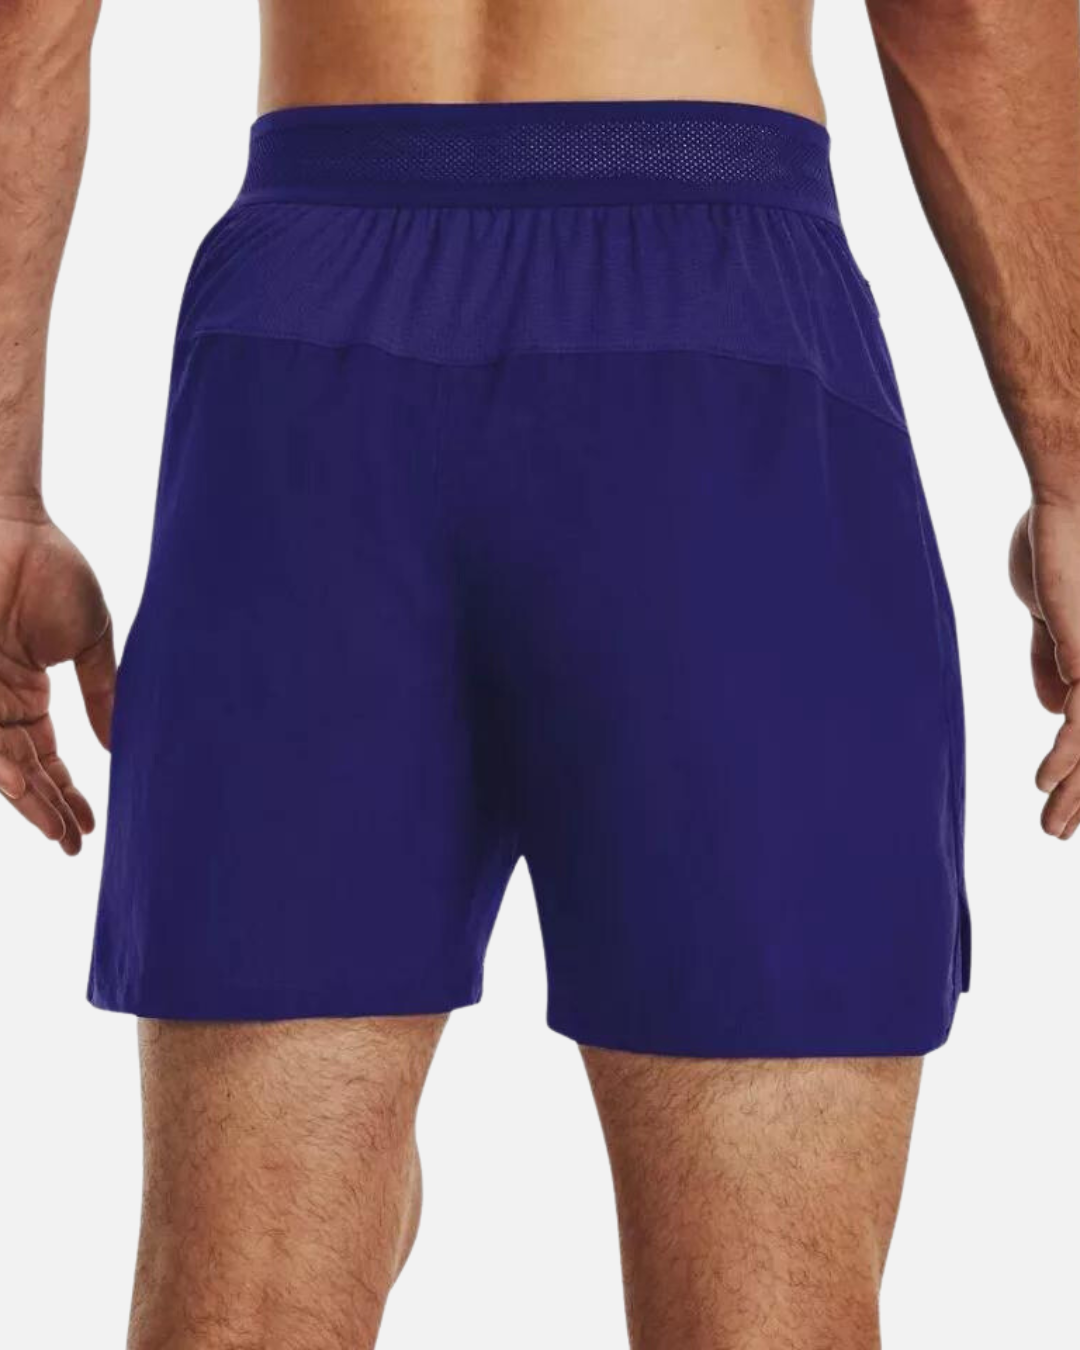 Under Armor Accelerate Shorts - Blue